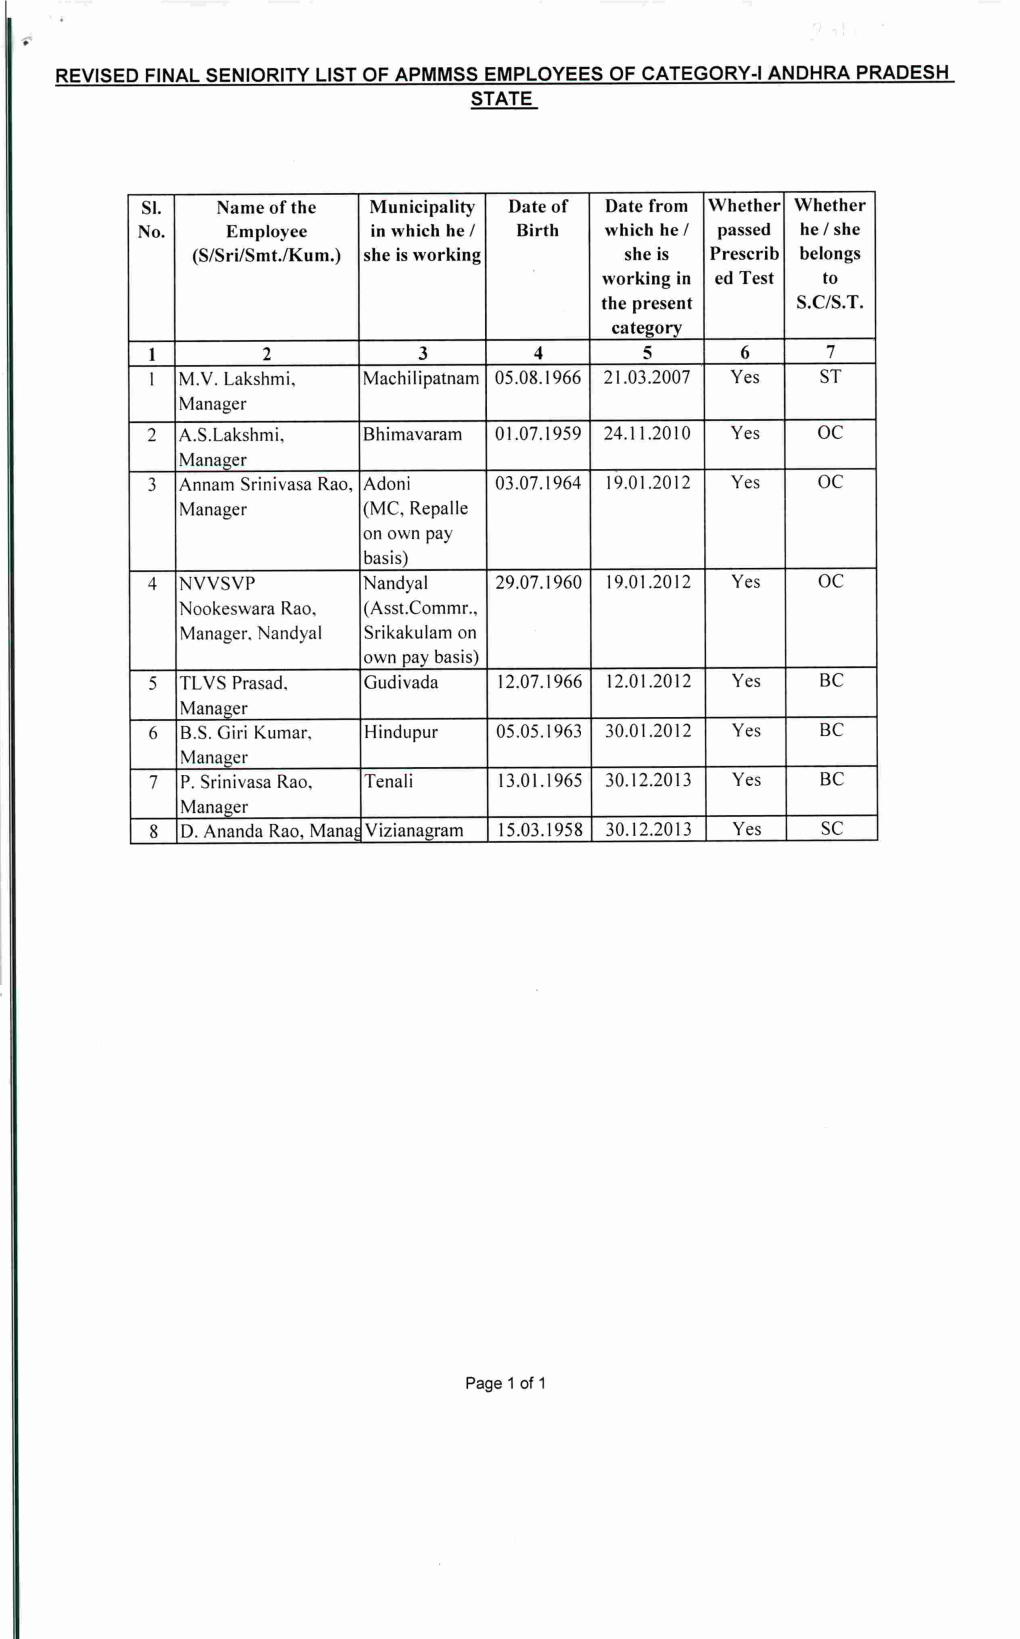 Revised Final Seniority List of Apmmss Employees of Category-I Andhra Pradesh State